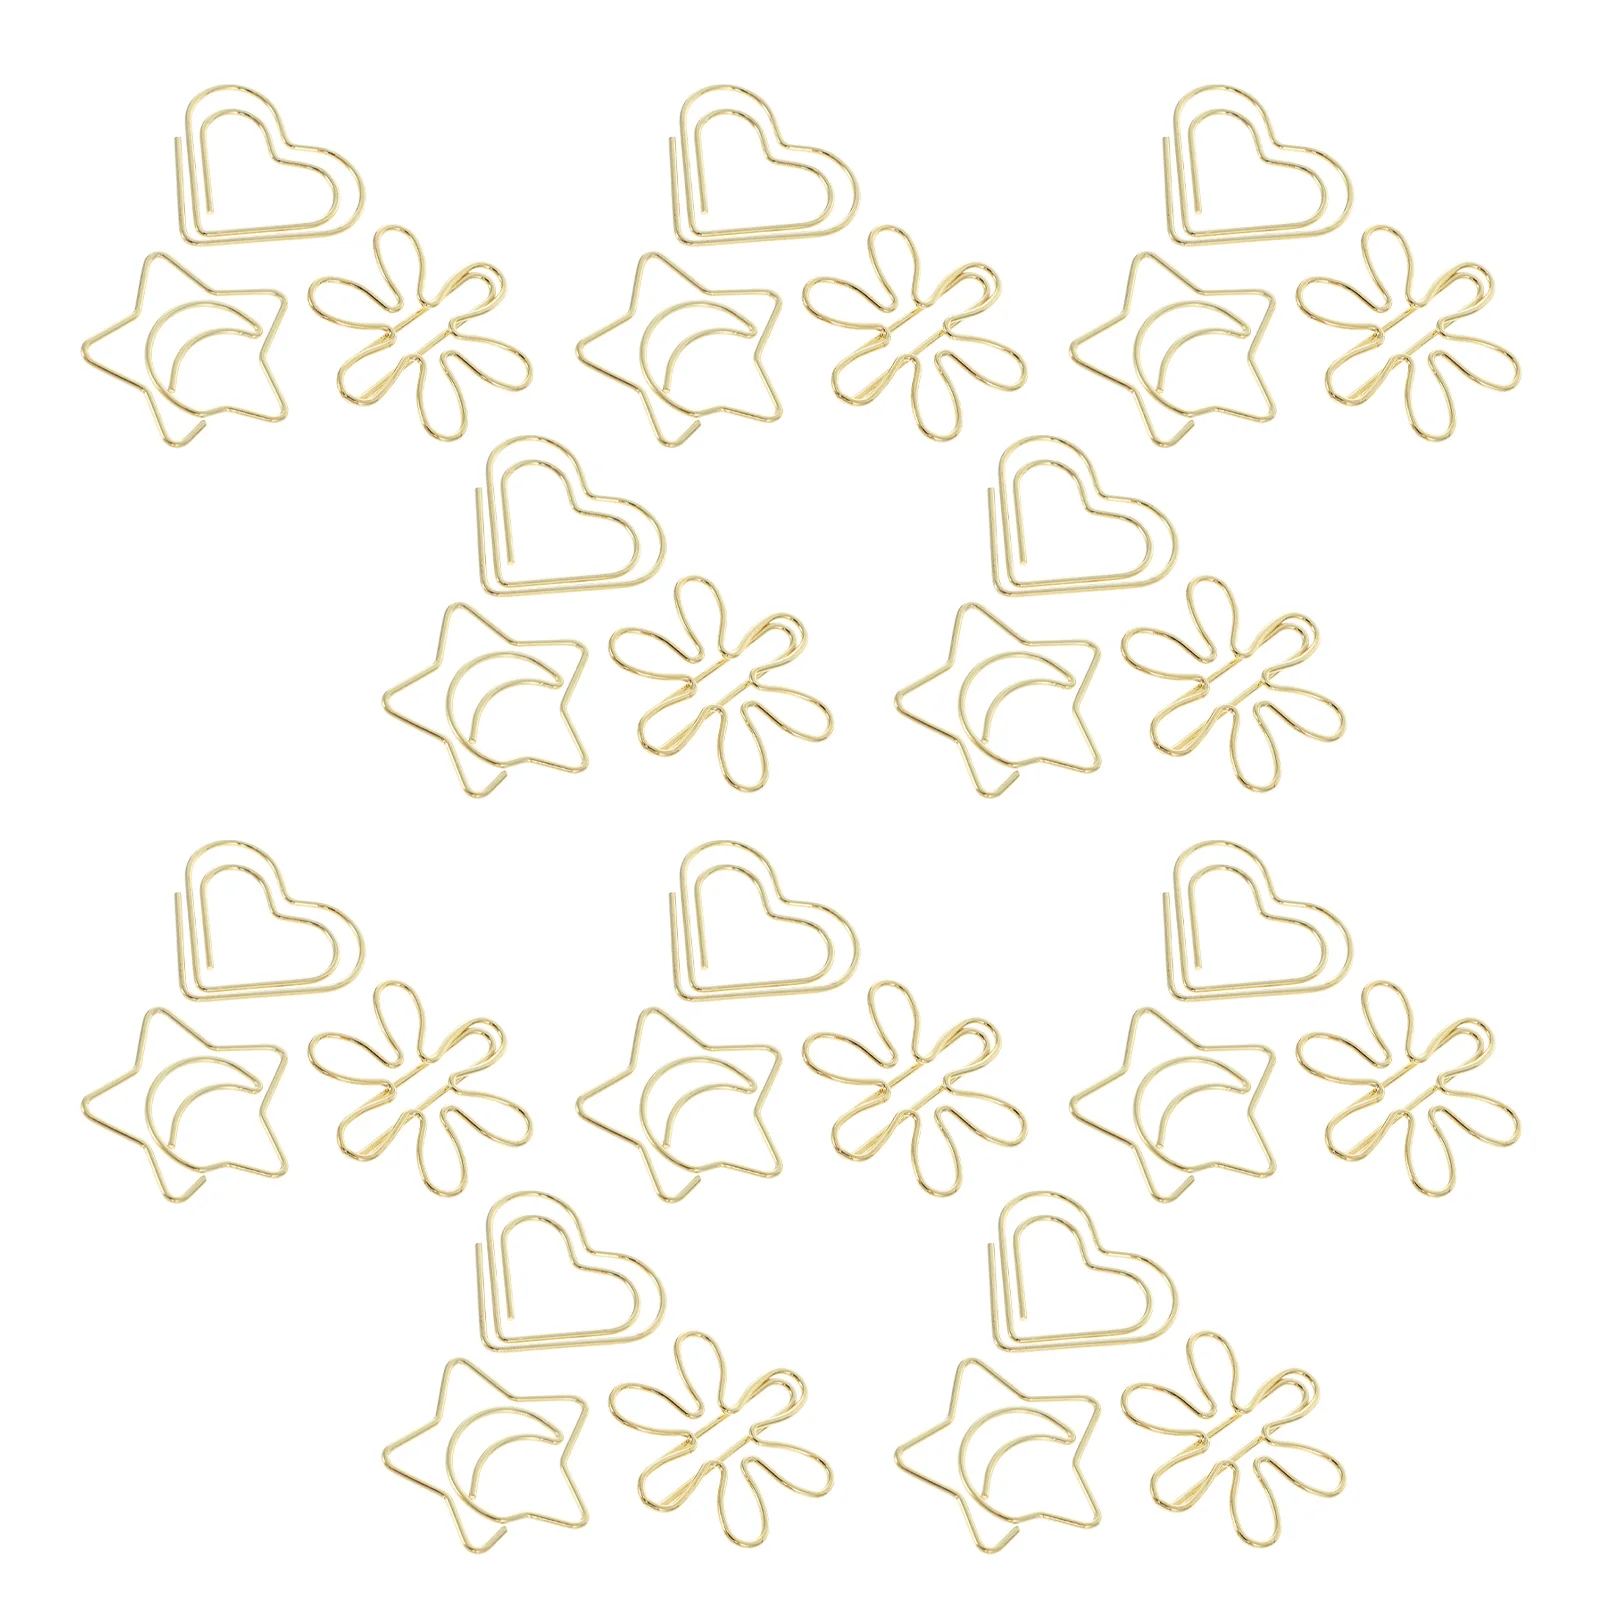 

Clips Paper Gold Metal Clipoffice Accessories Bookmark Desk Note Binder Decorative Wire Heart Paperclips Stationery Clamp Page